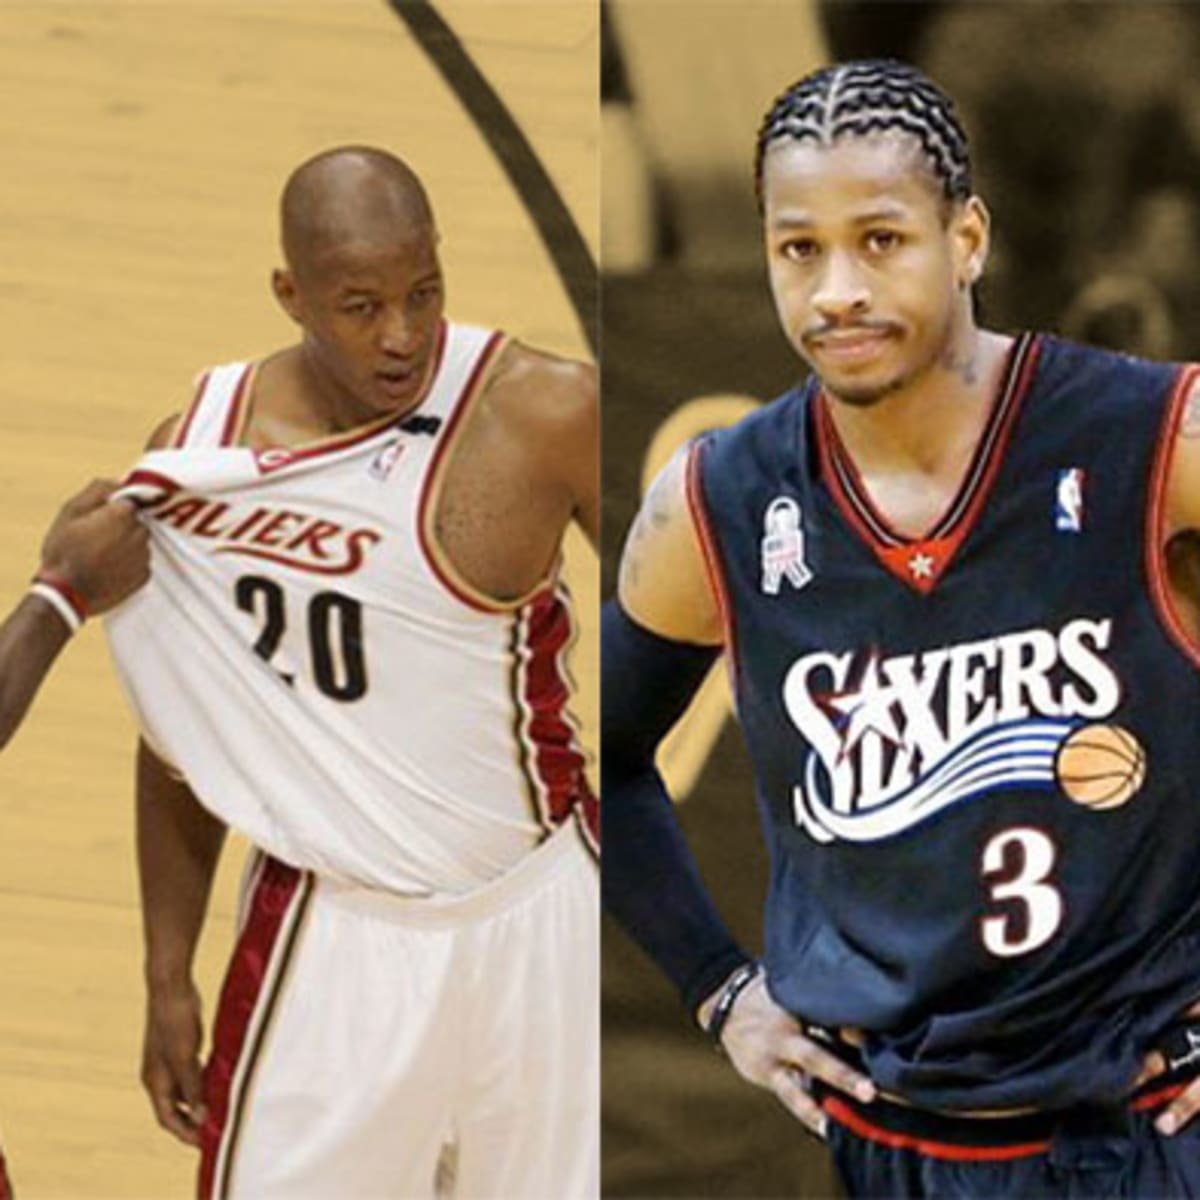 He's earned the right to be called a star in the NBAit doesn't bother  me” — Eric Snow on being Allen Iverson's supporting cast - Basketball  Network - Your daily dose of